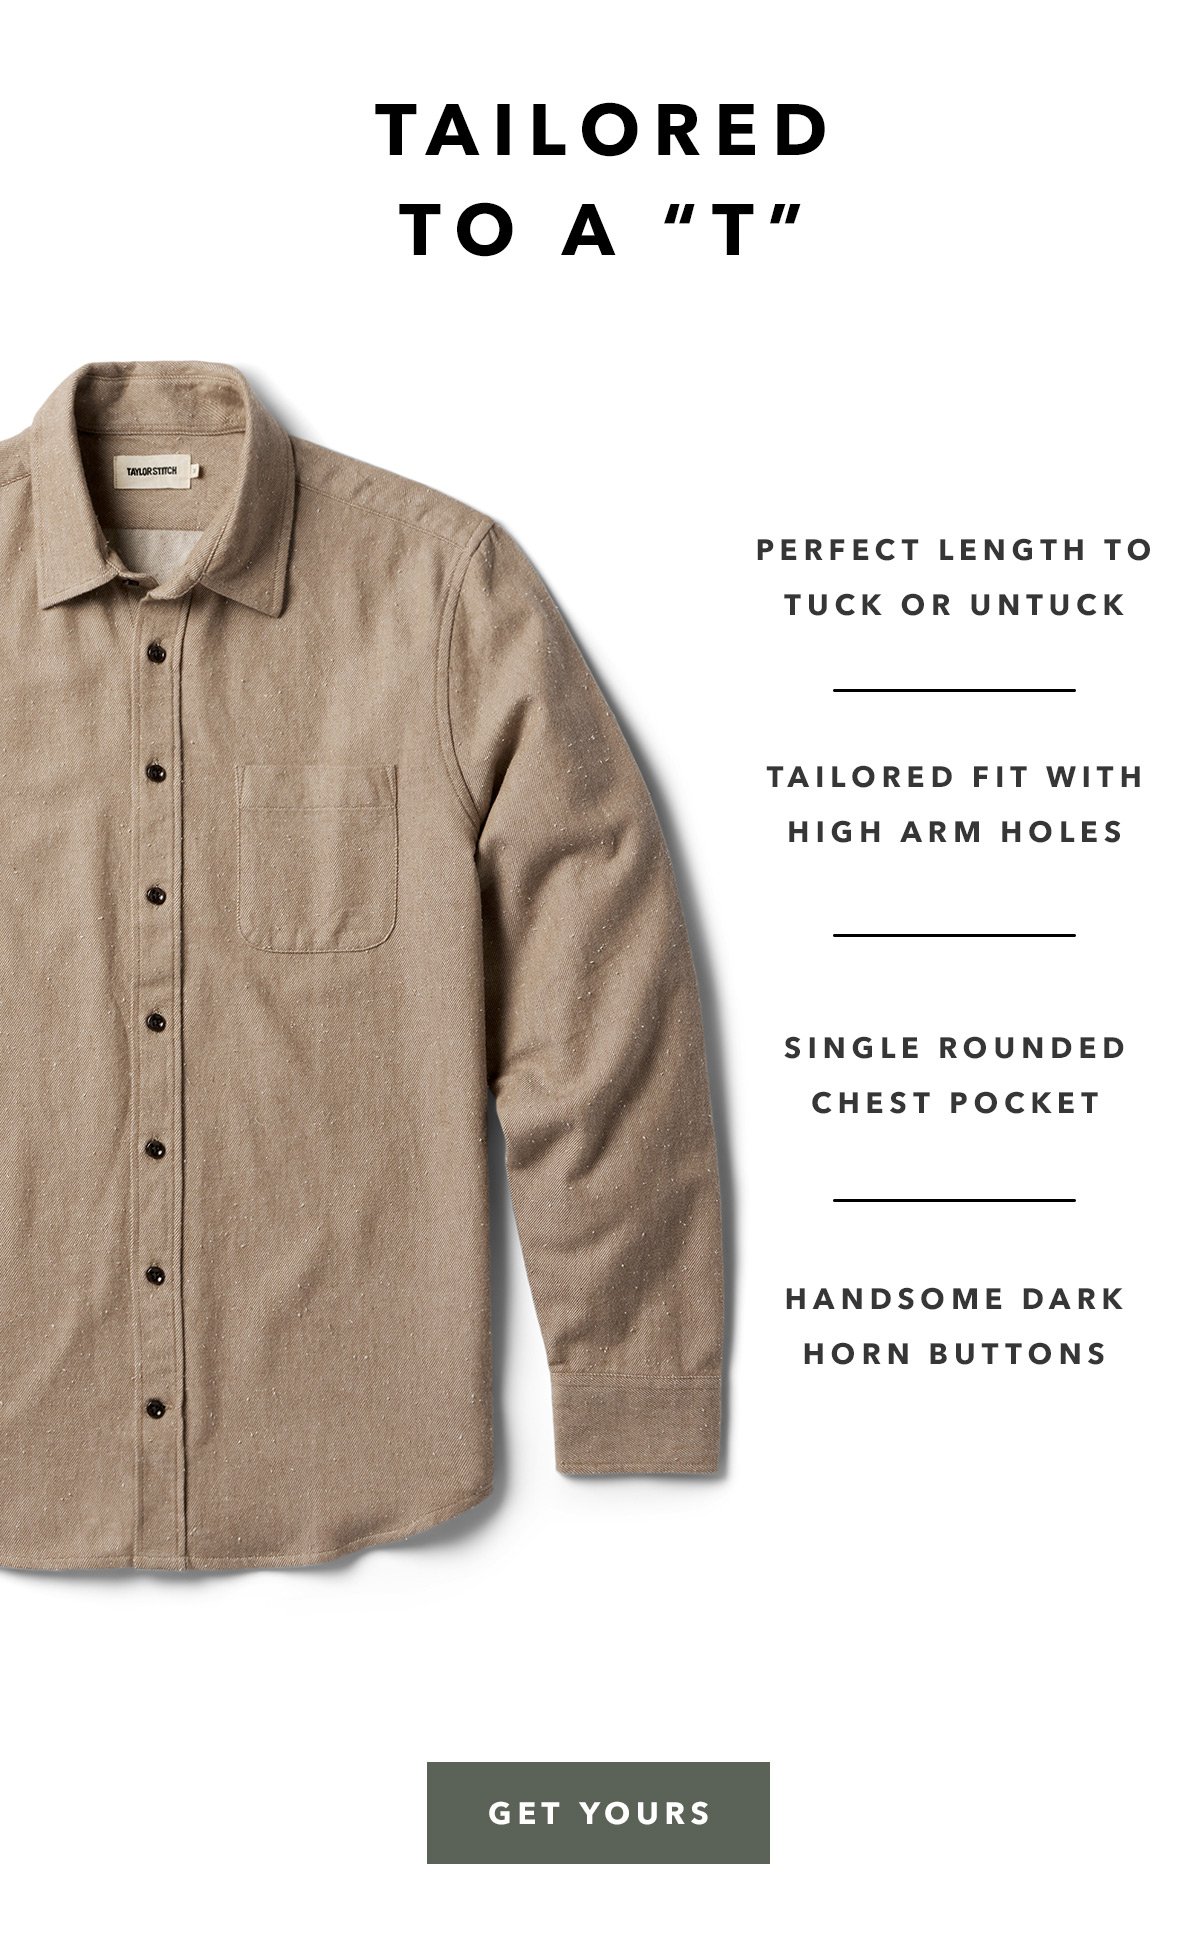 Tailored to a "T": * Perfect length to tuck or untuck.  * Tailored fit with high arm holes.  * Single rounded chest pocket.  * Handsome dark horn buttons.